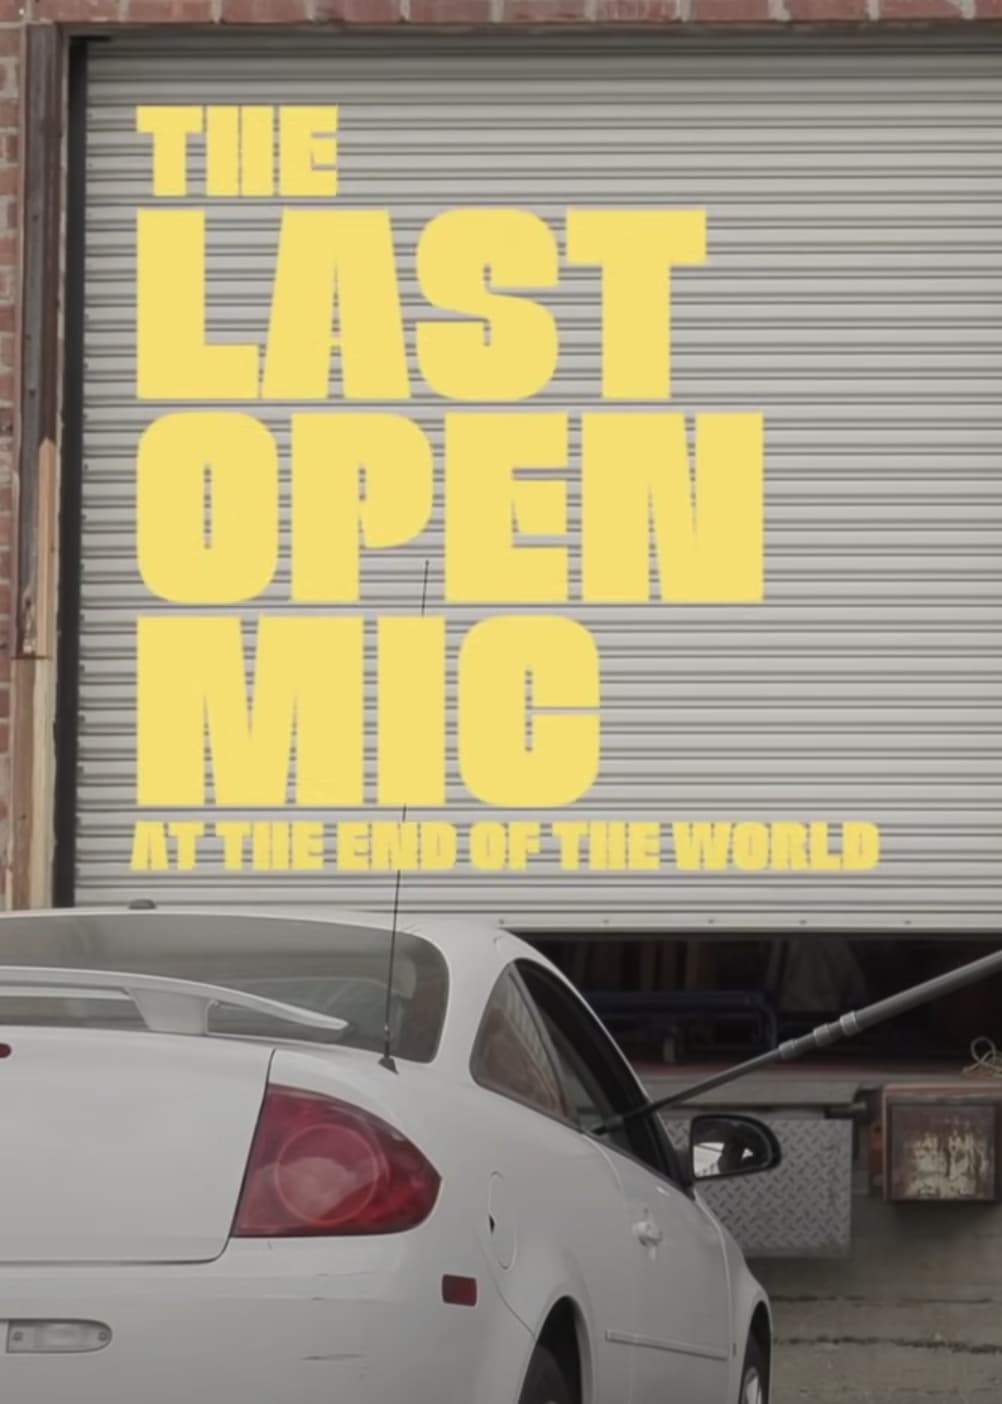 The Last Open Mic At The End of the World